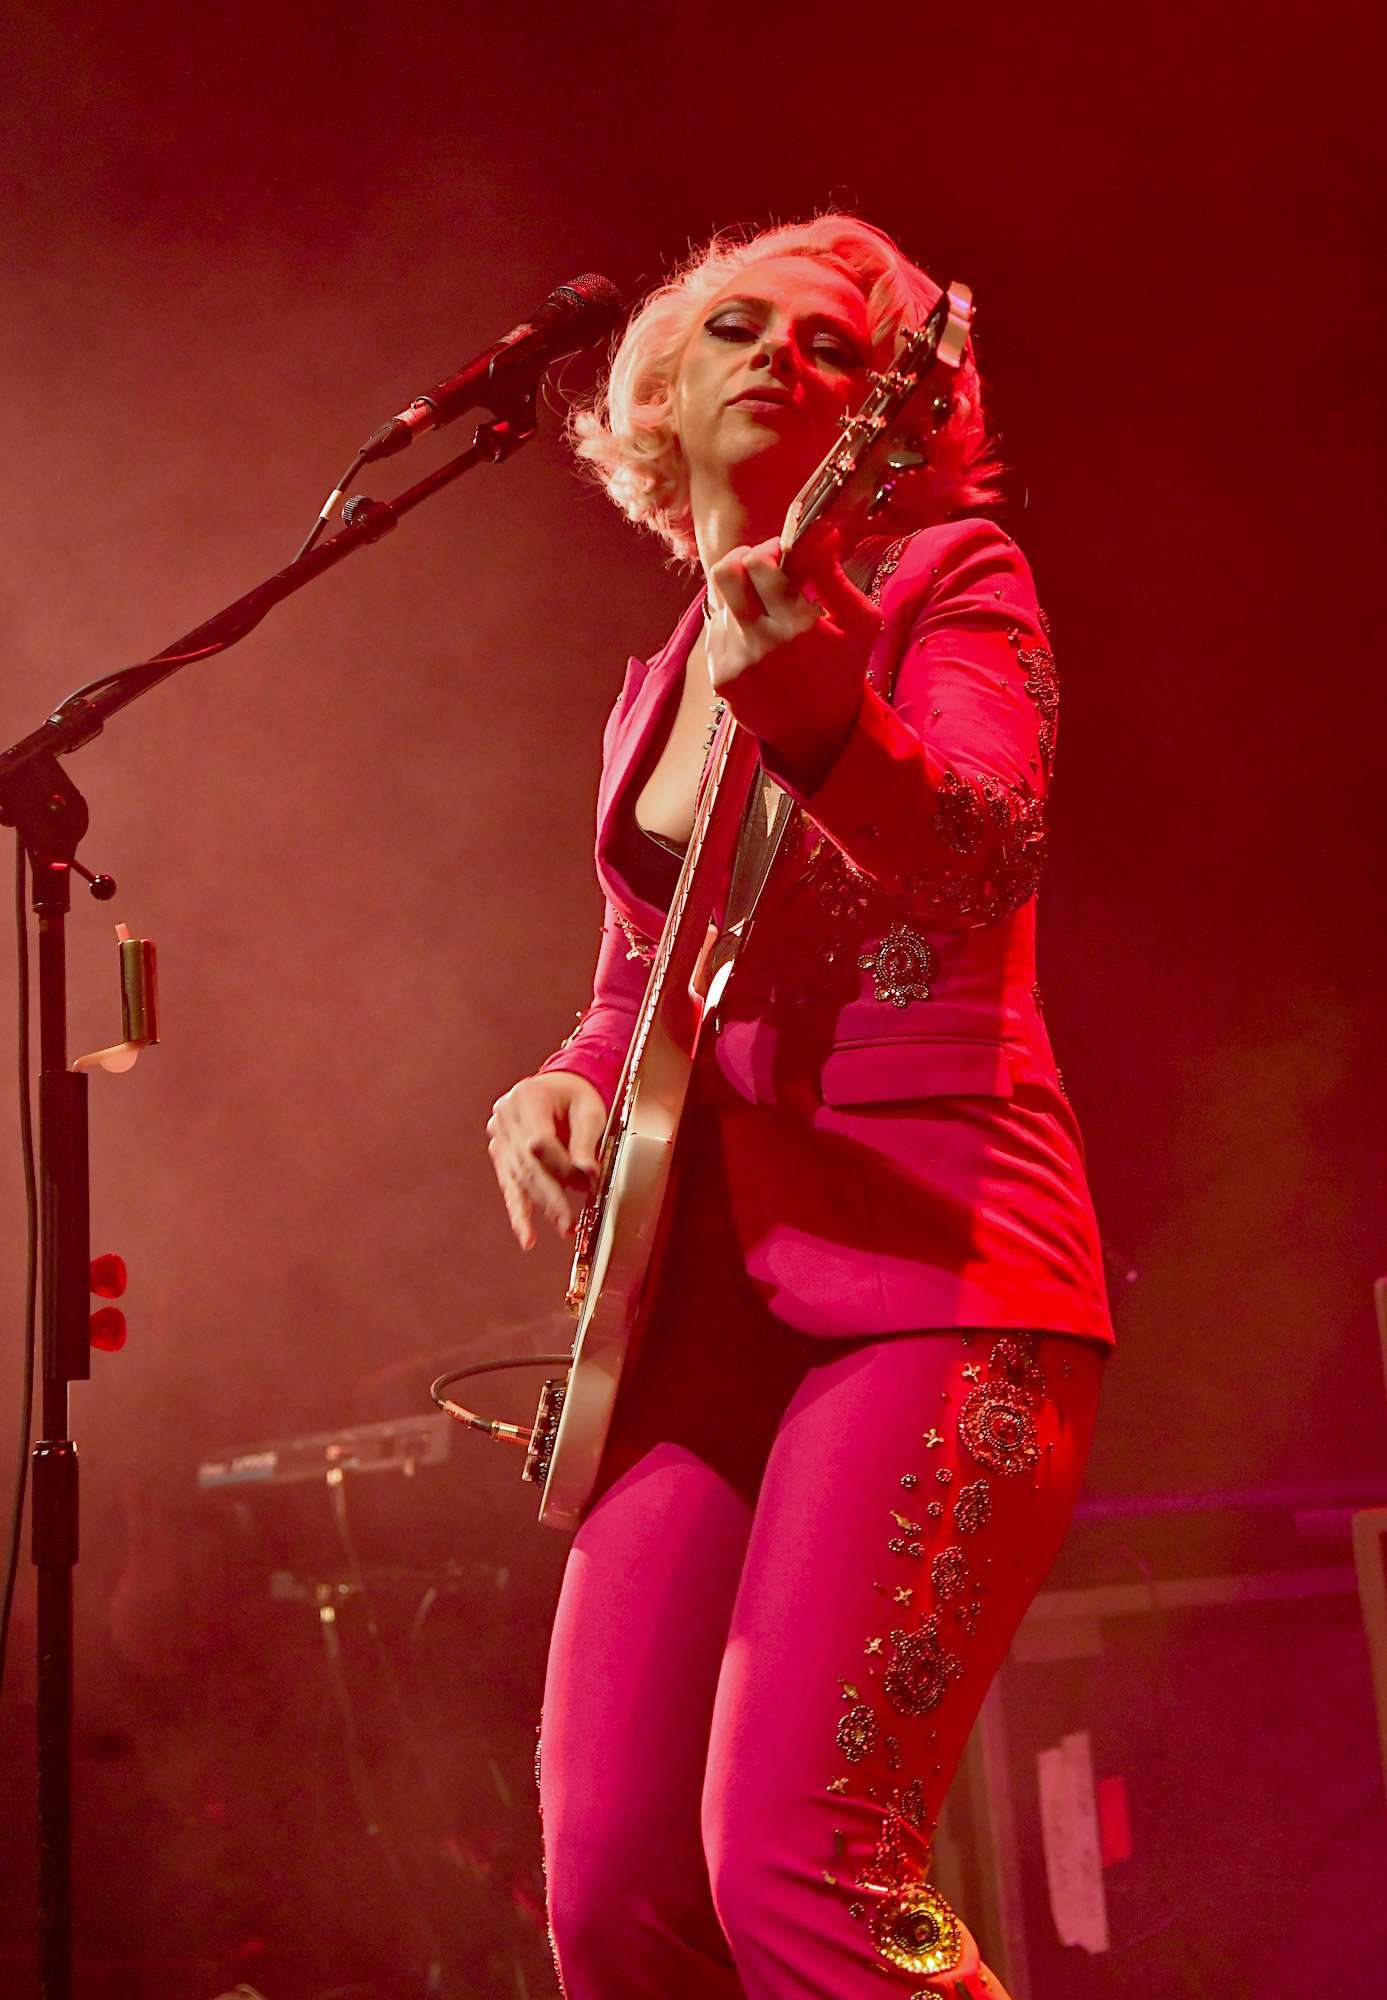 Samantha Fish Live at Park West [GALLERY] 11